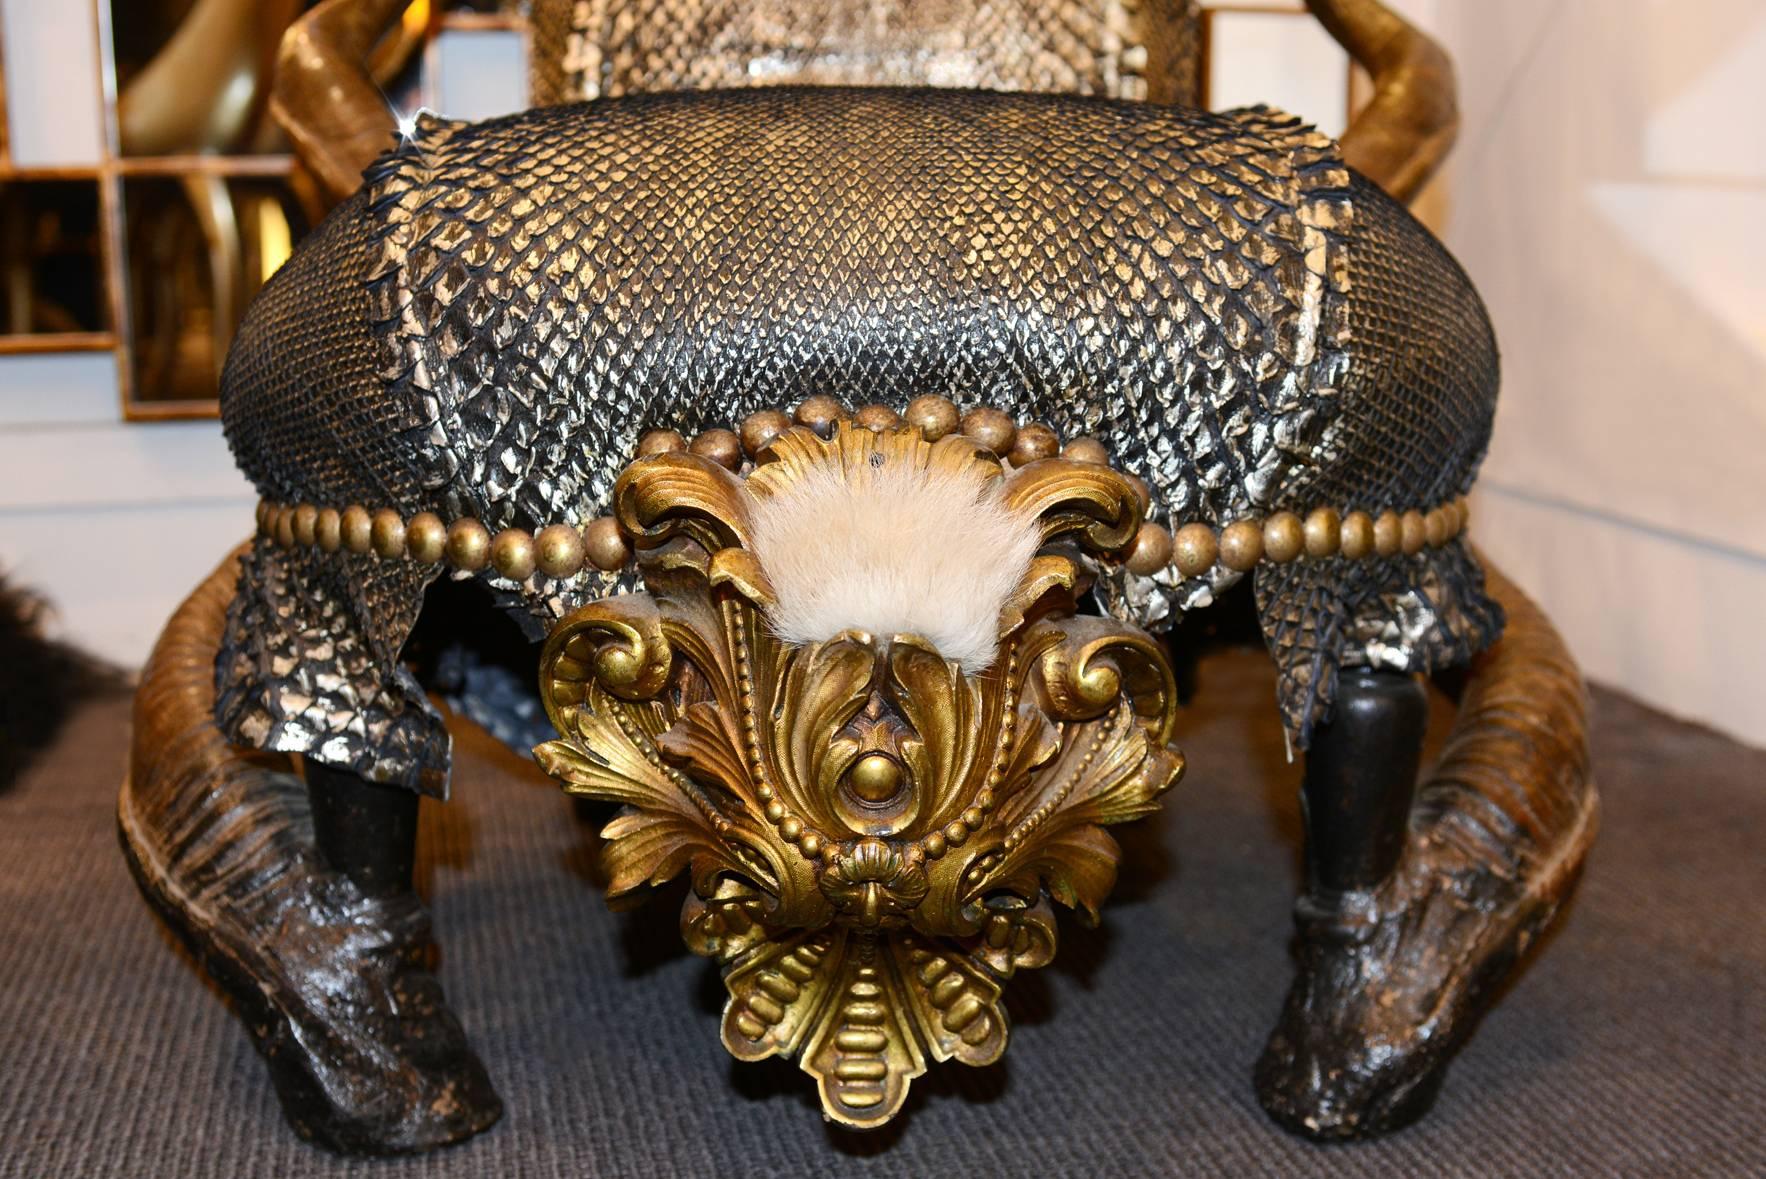 Raptor Chair, Genuine Python Skin,
Real Kudu Horns and Bronze Finishes.

